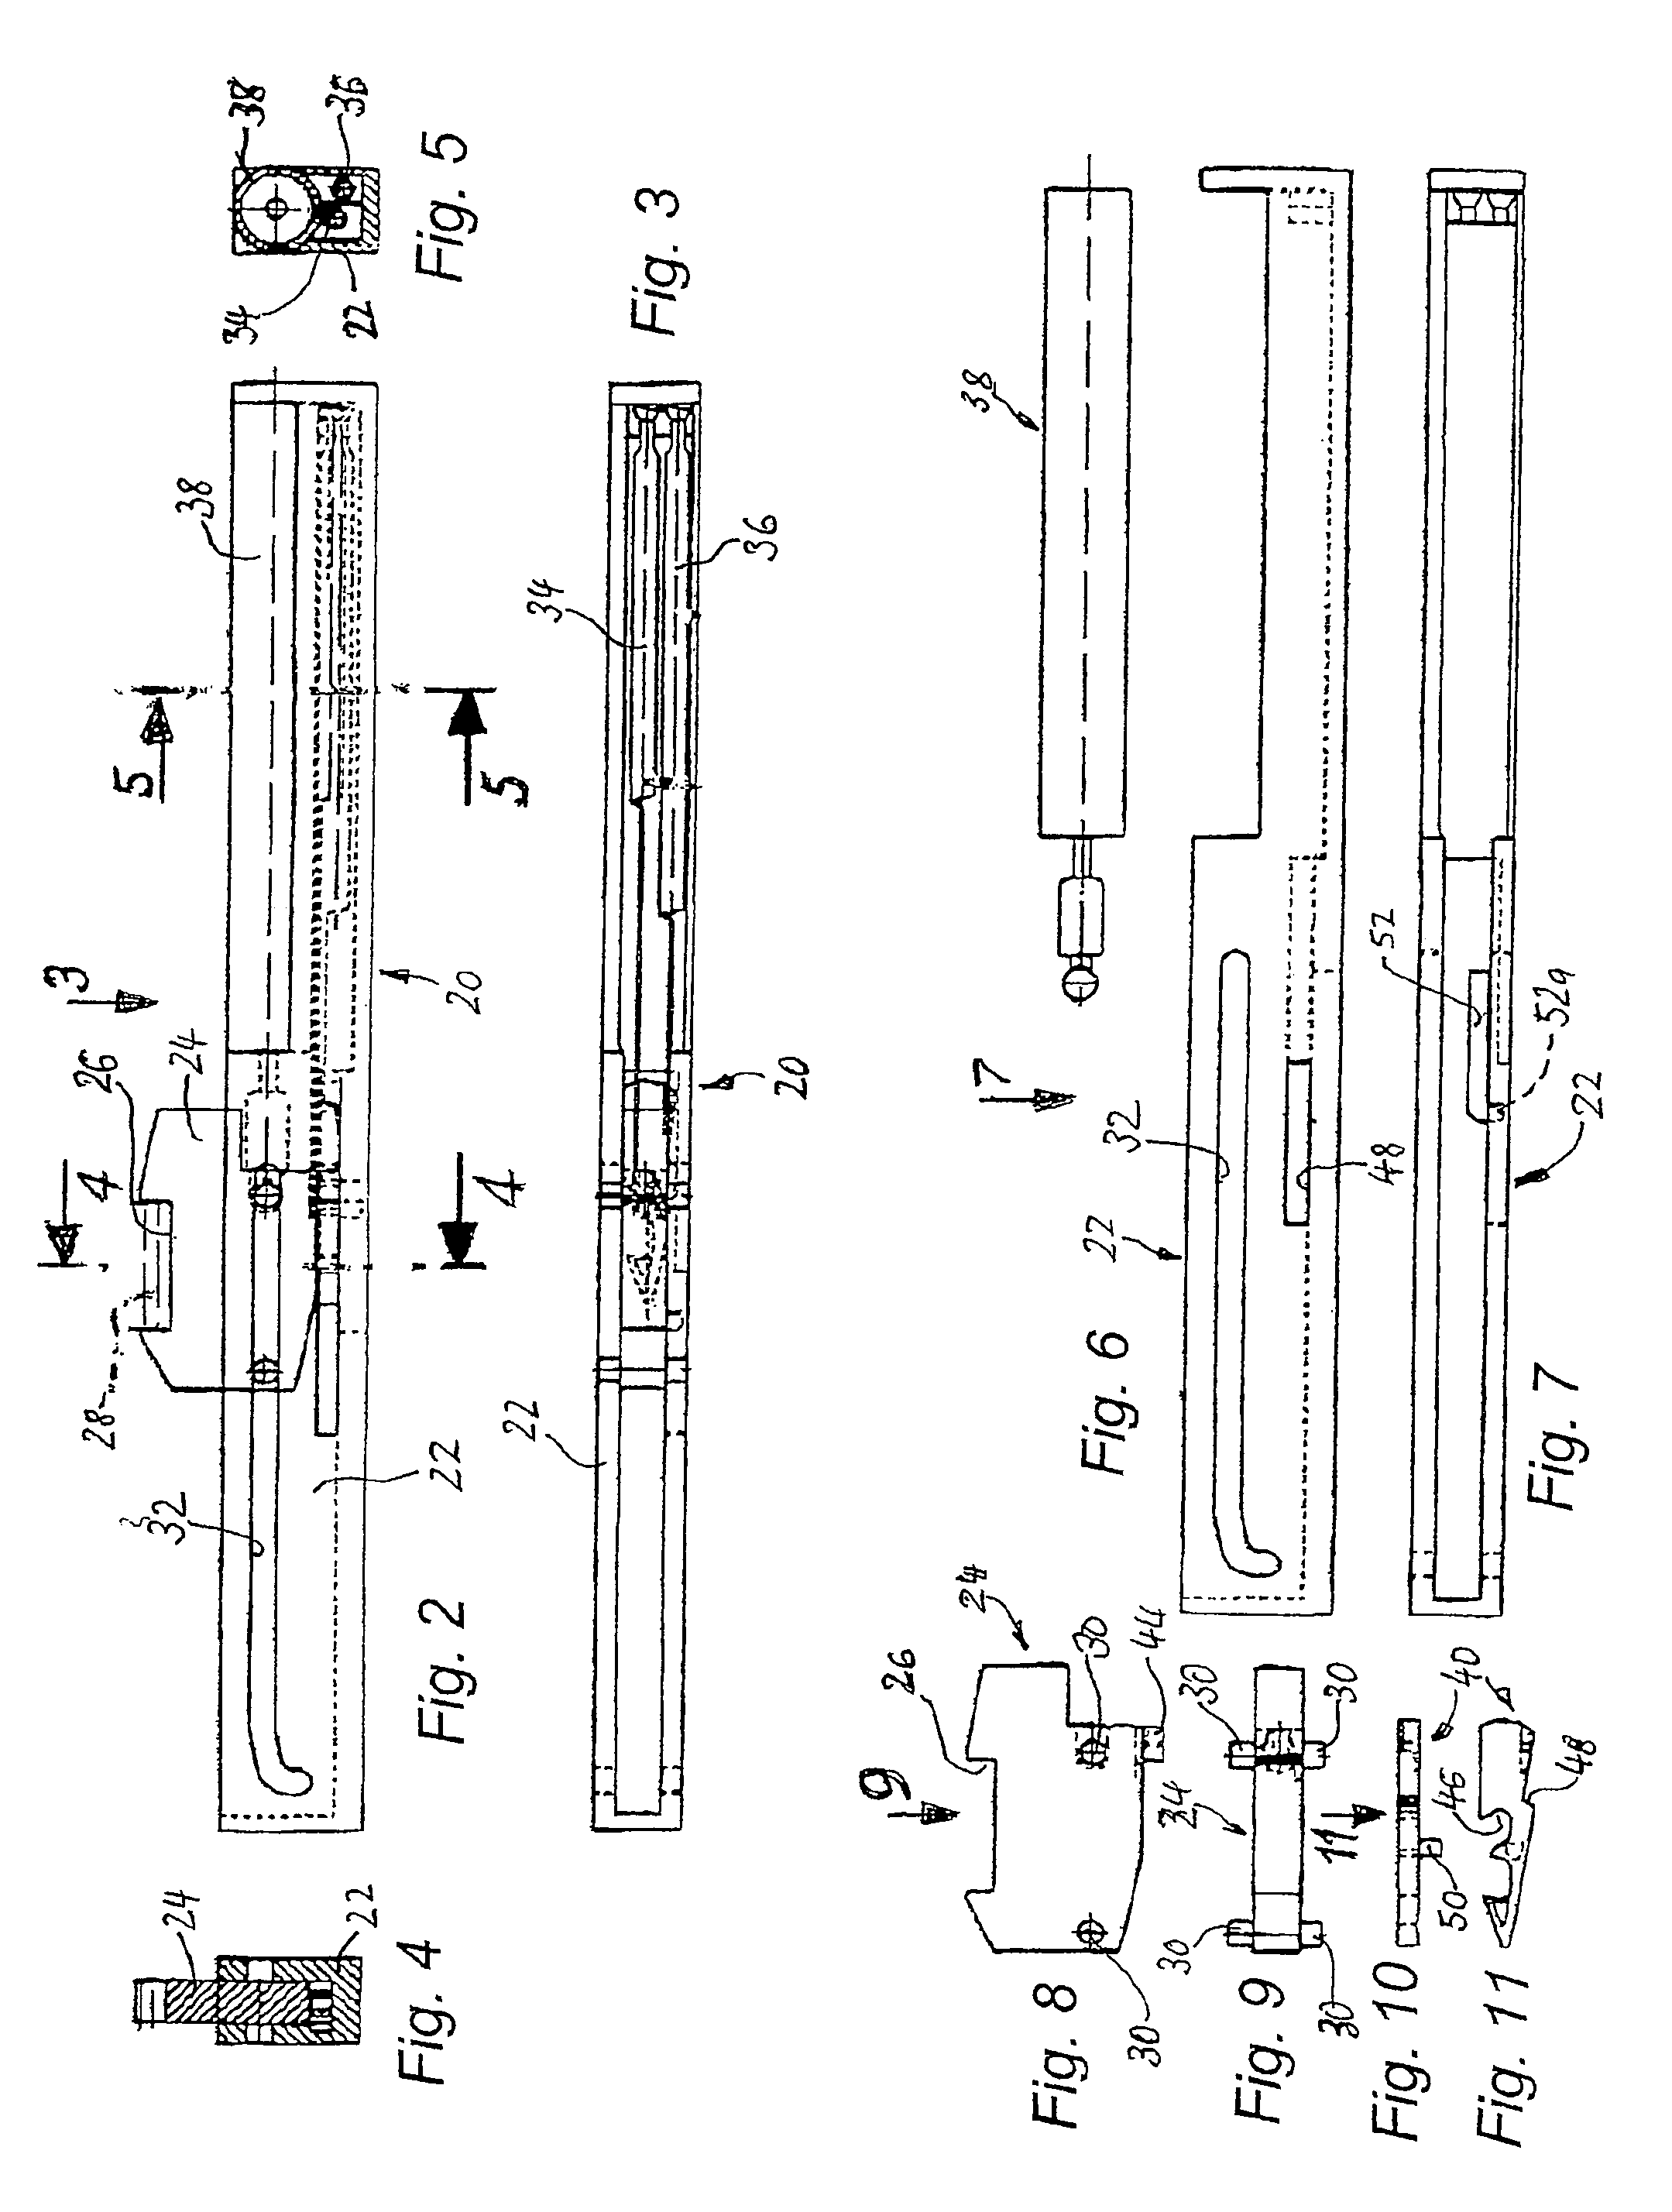 Drawer opening guide comprising an automatic retracting device with an integrated damping mechanism